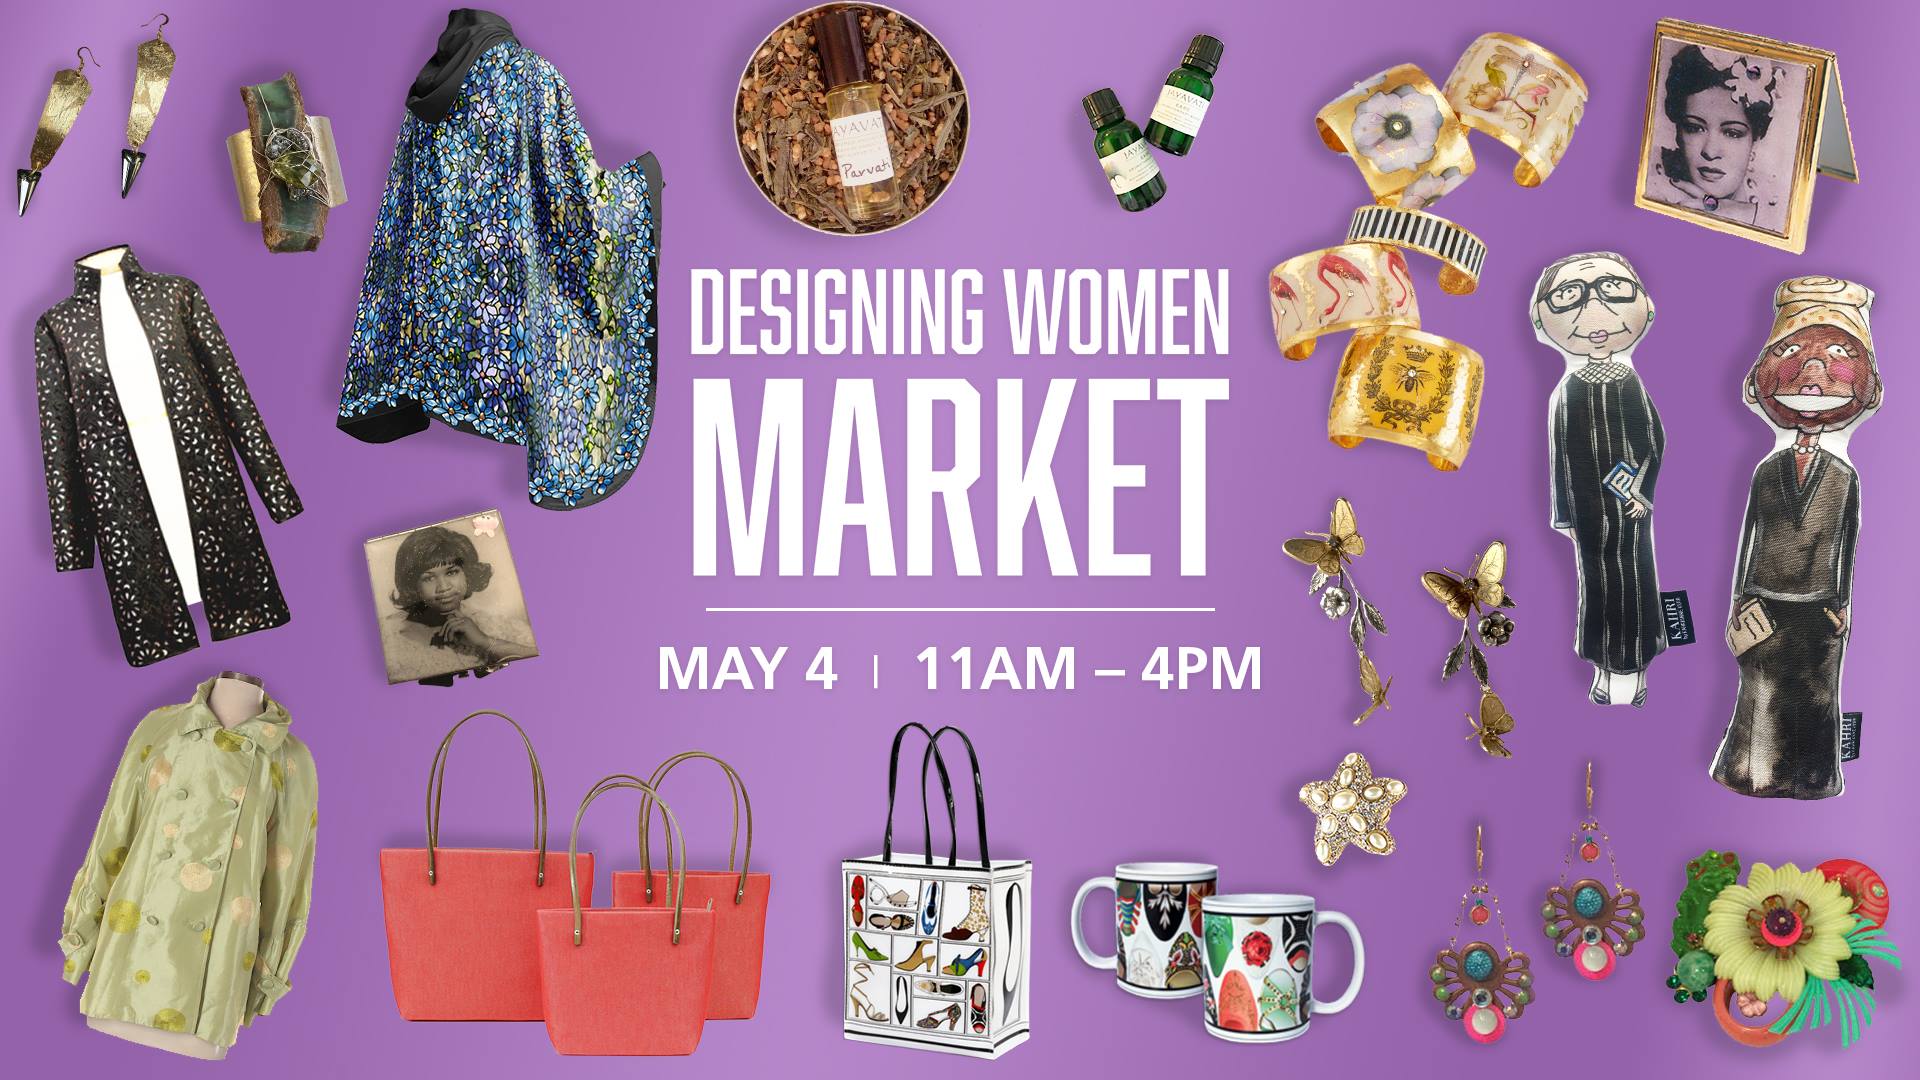 Designing Women Market and celebrate the Center for Women's History at the New-York Historical Society